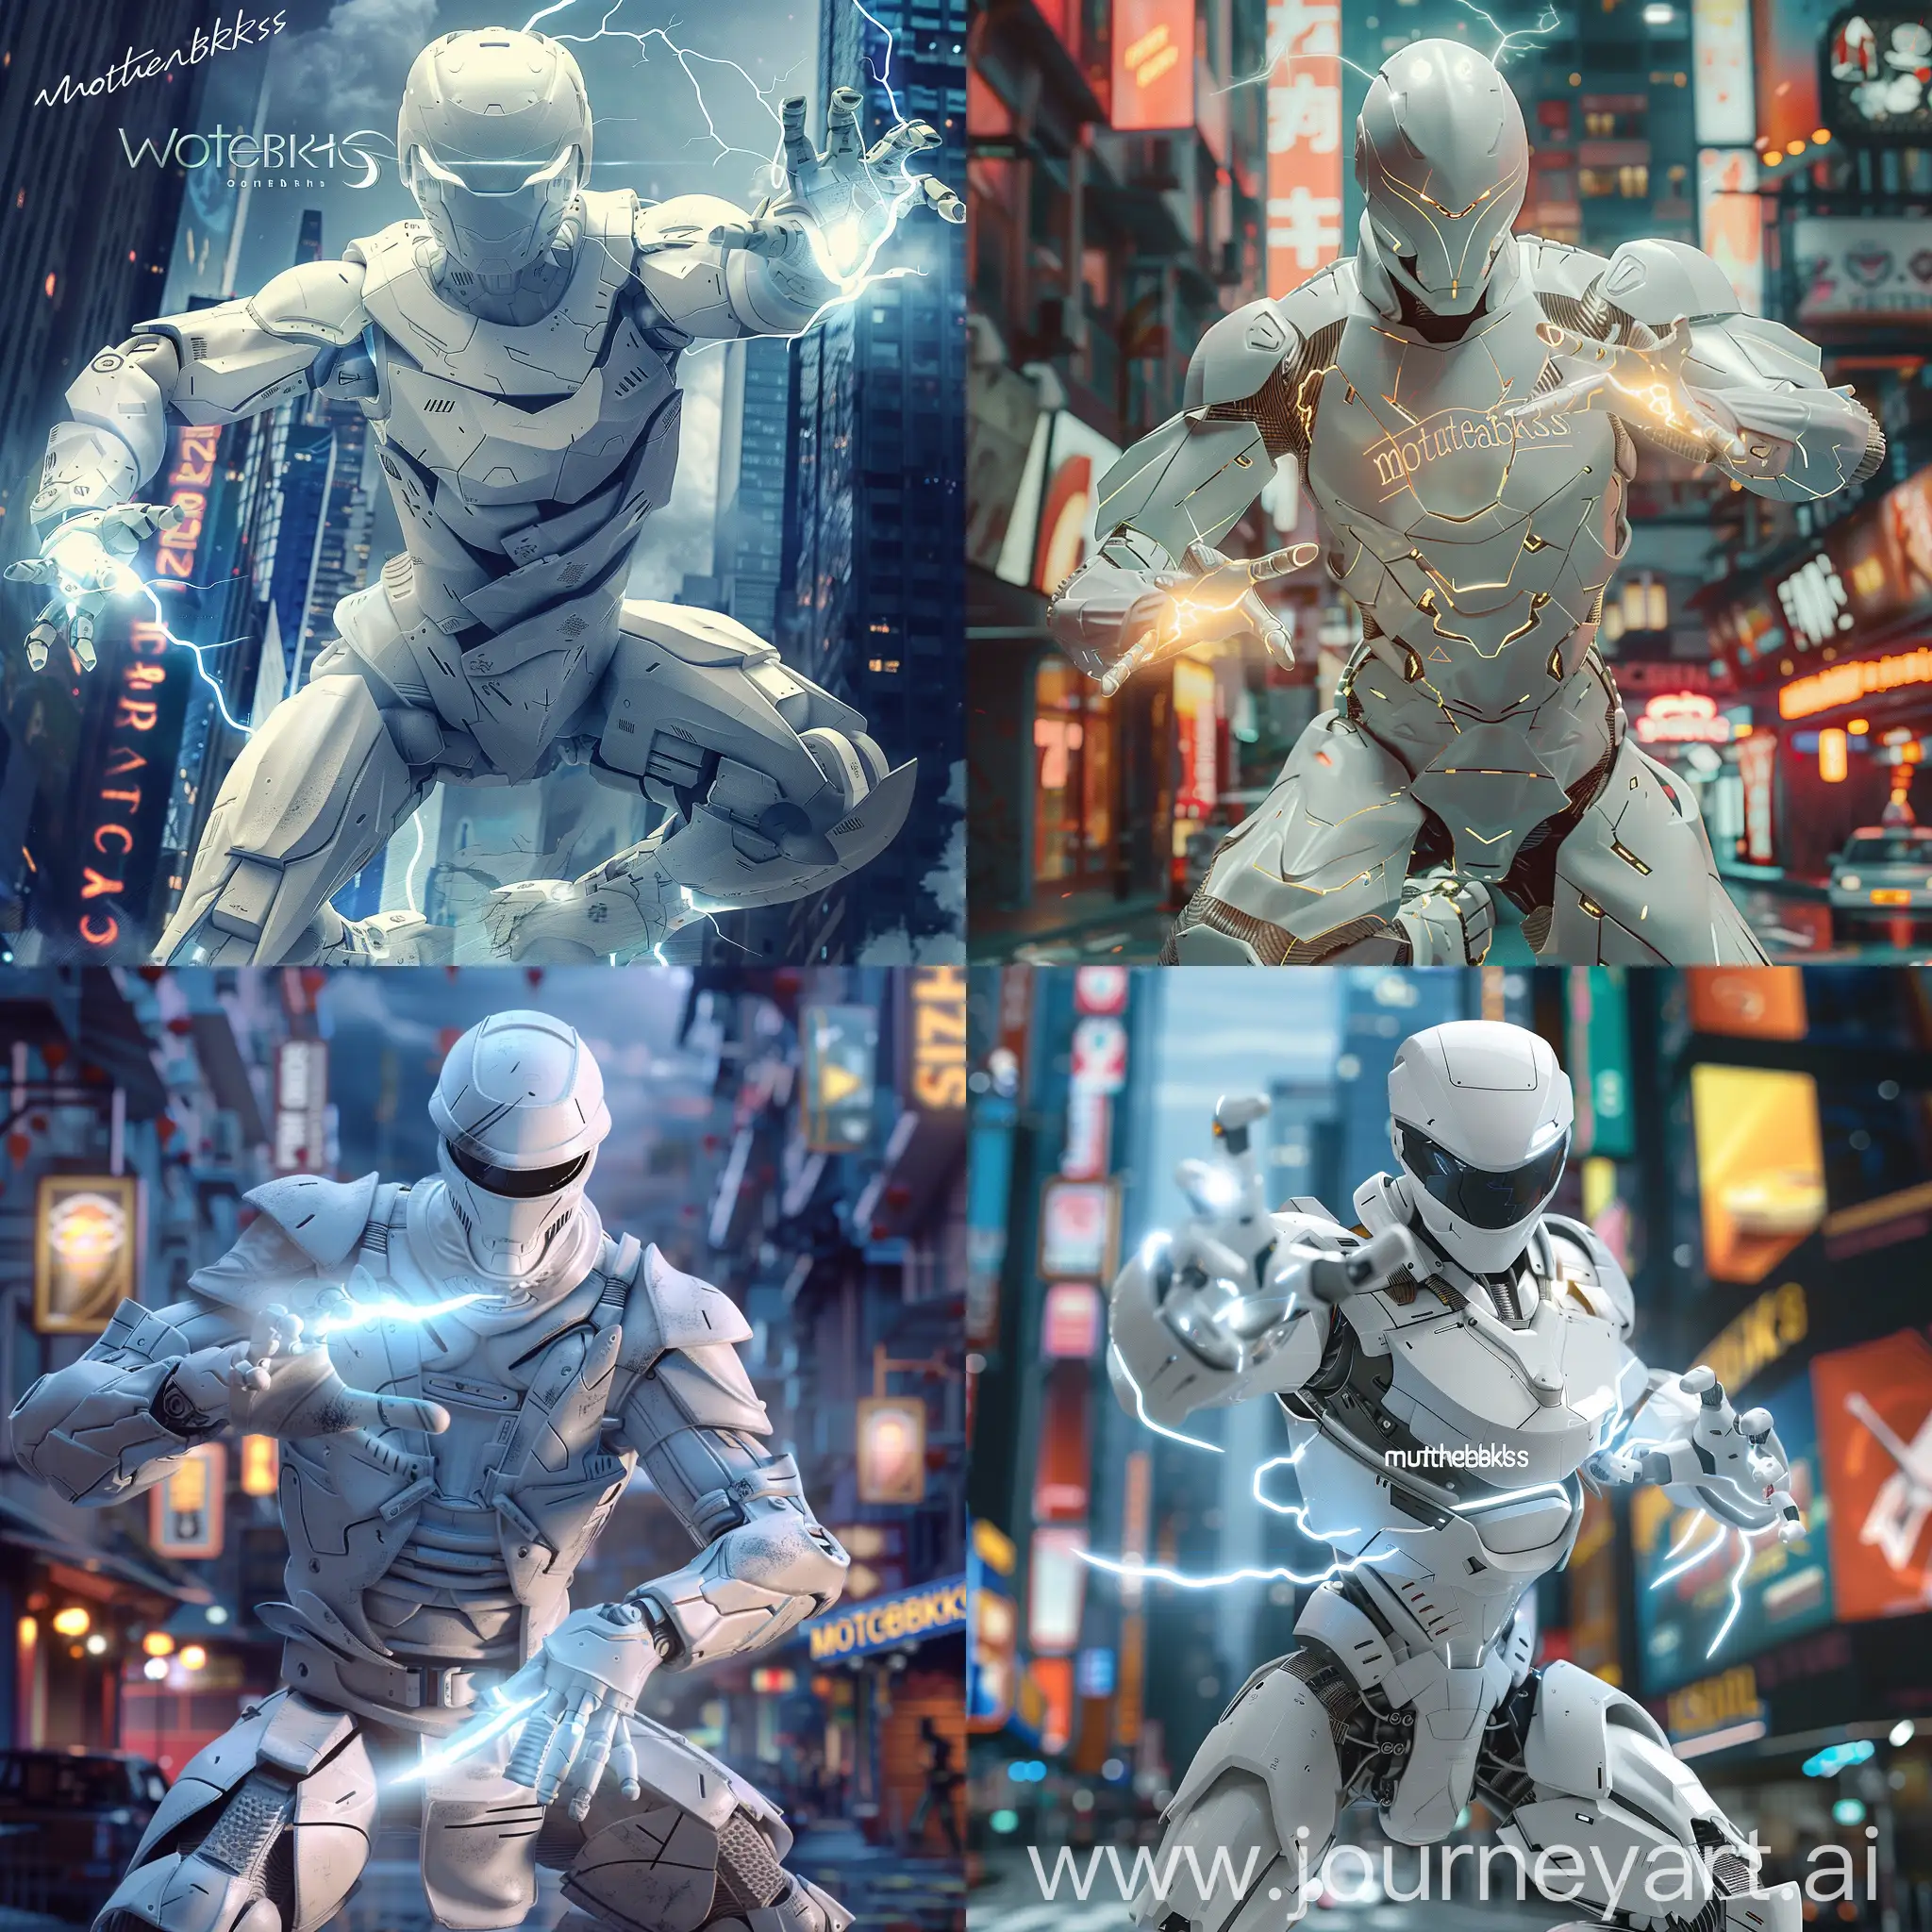 a white ninja robot,light energy on his hands, hd, futuristic magenda city background and a lettering logo on him or behind him with the name Motivbreaks